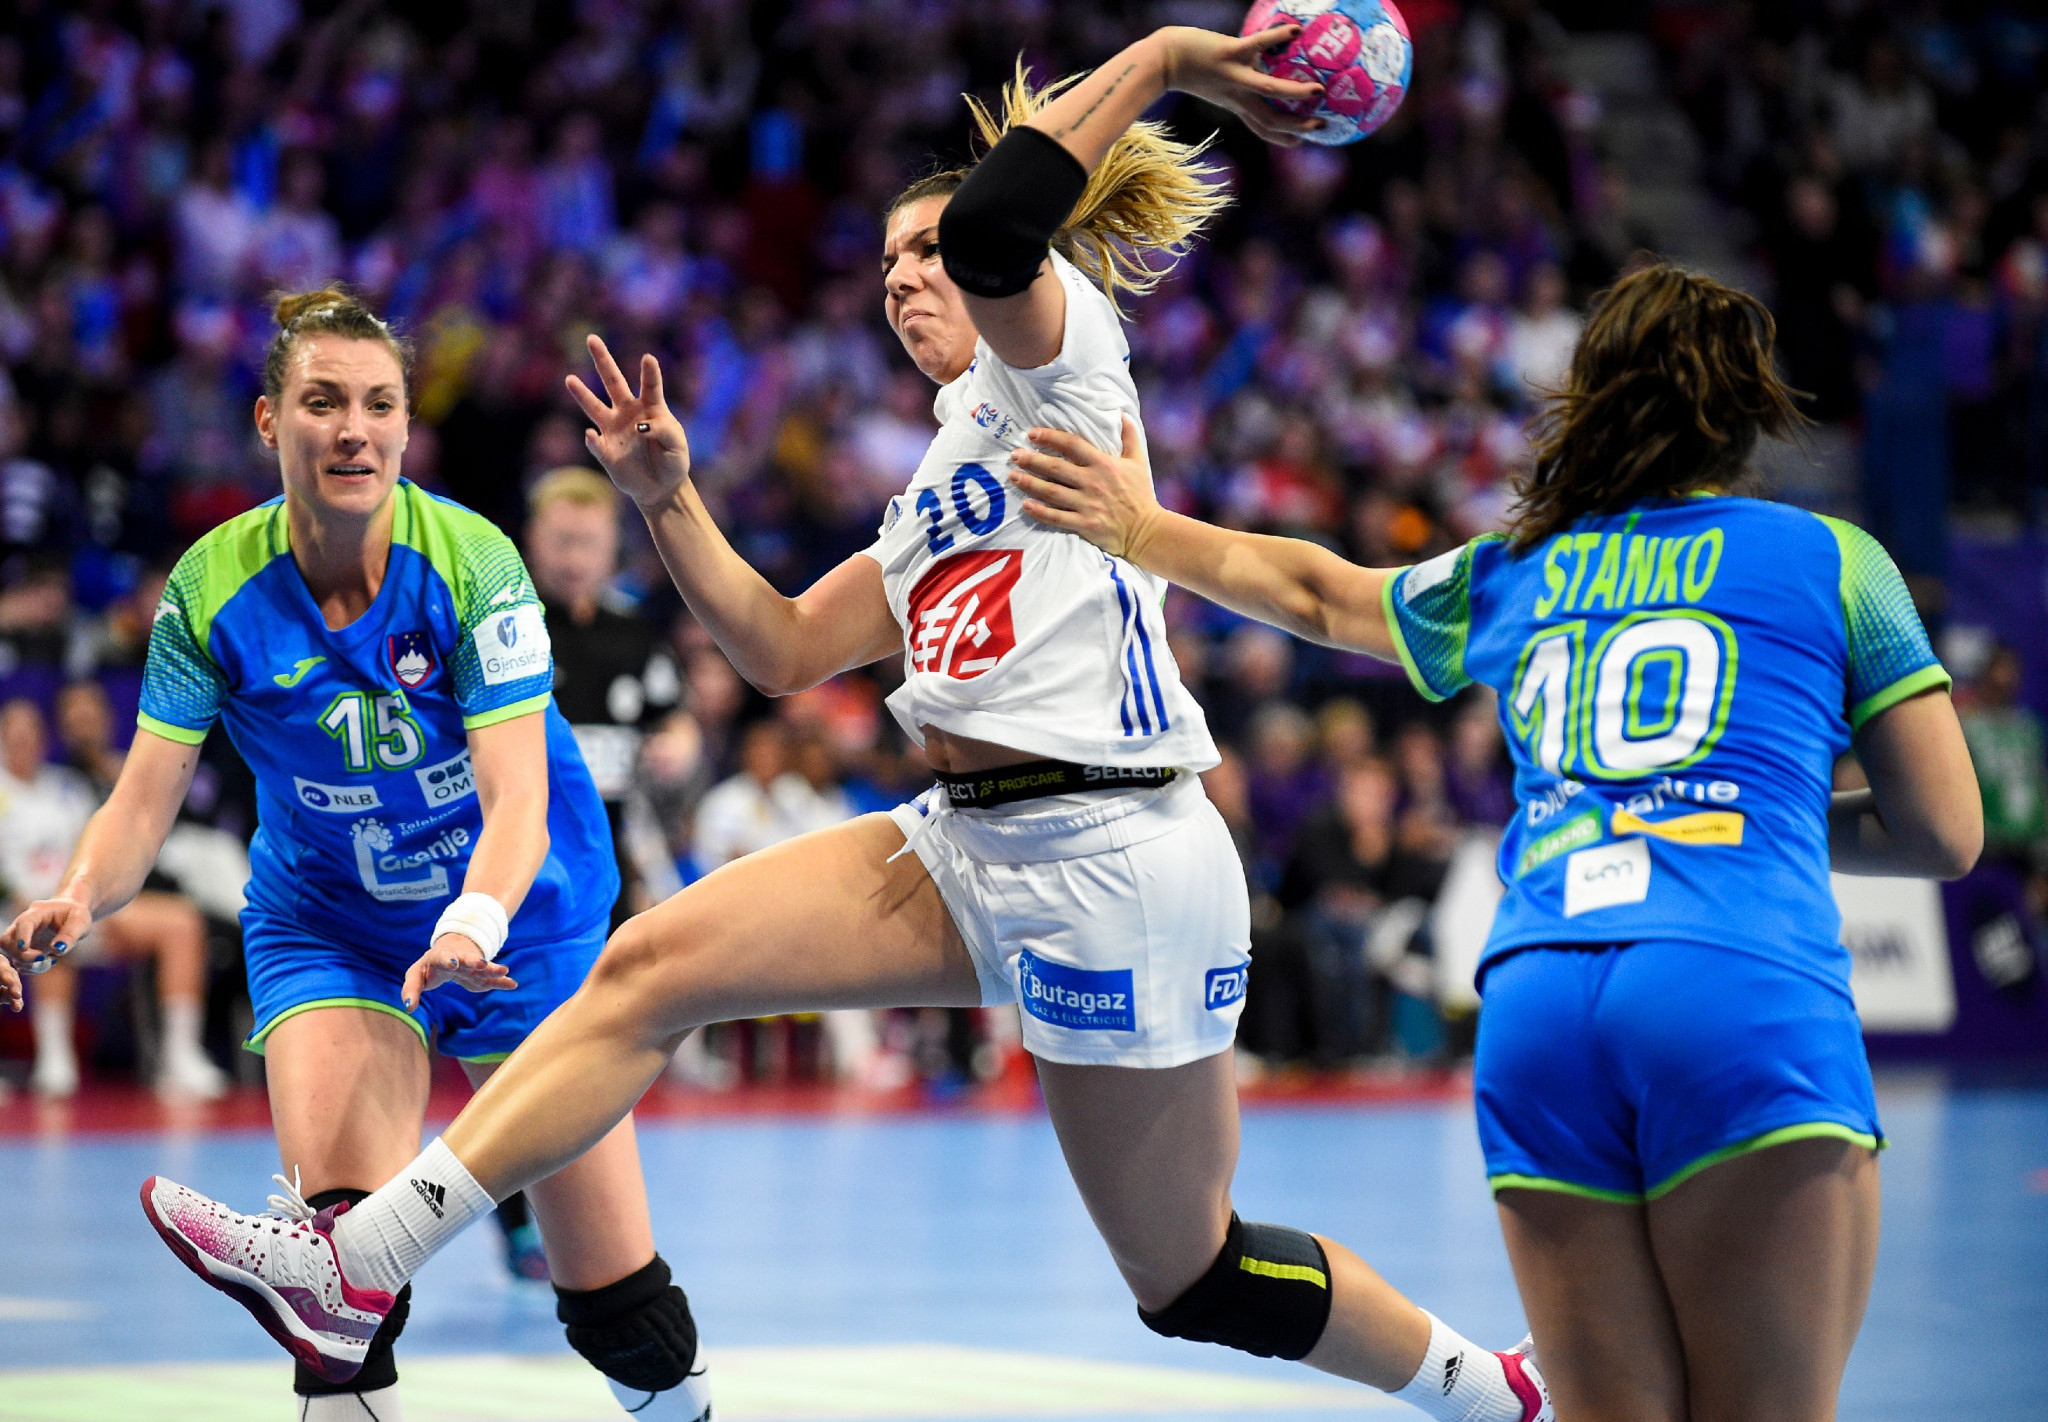 Hosts France get first win of European Women's Handball Championships after disappointing start